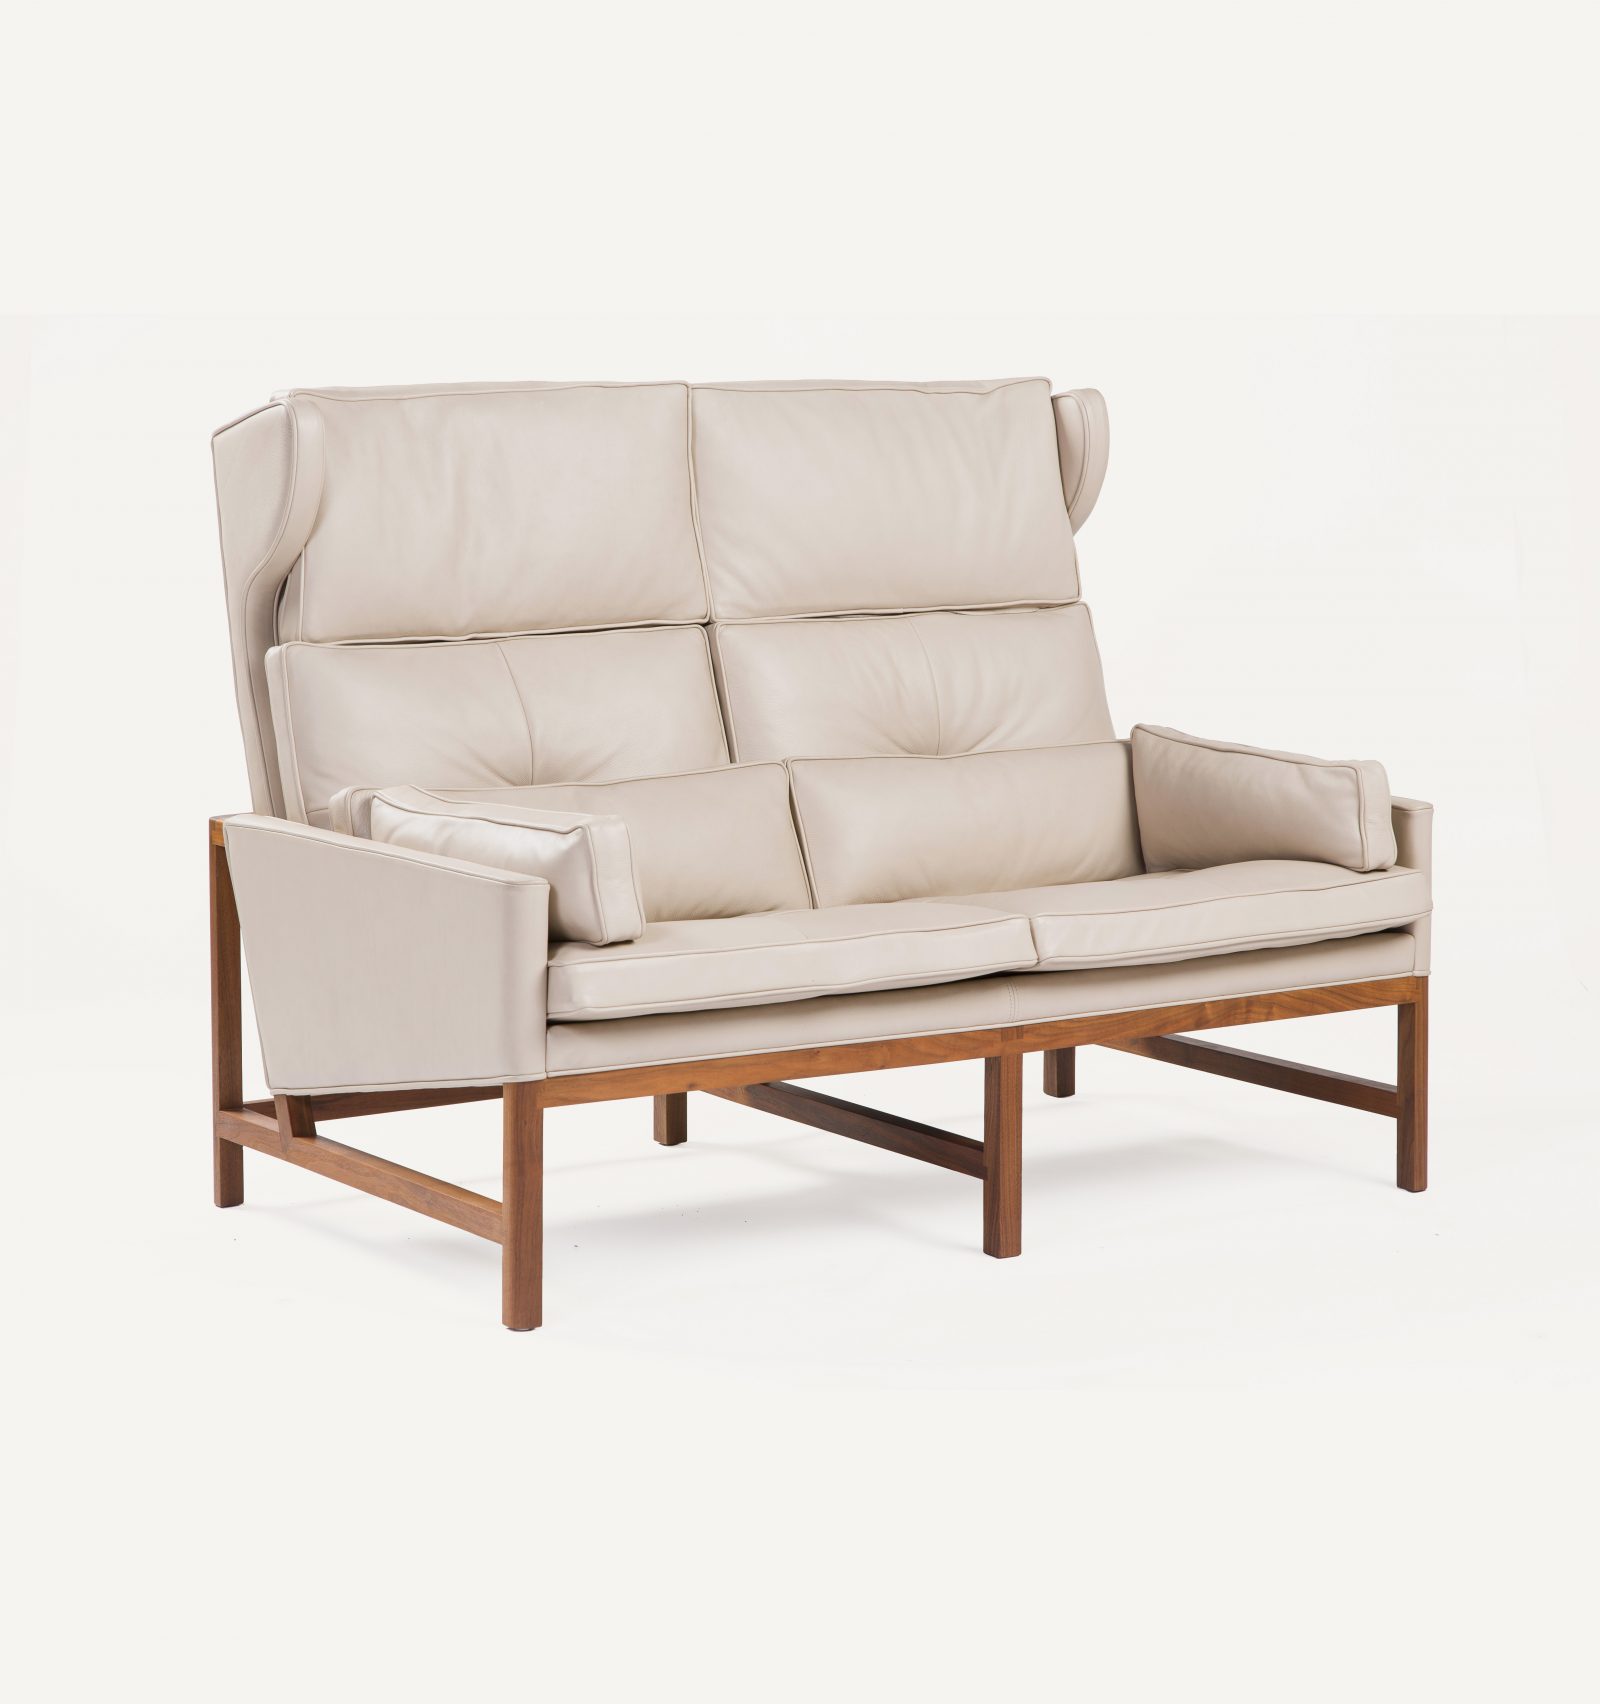 BassamFellows CB-522 Wing Back Settee with exposed solid Walnut frame, credit ELDON Zimmerman